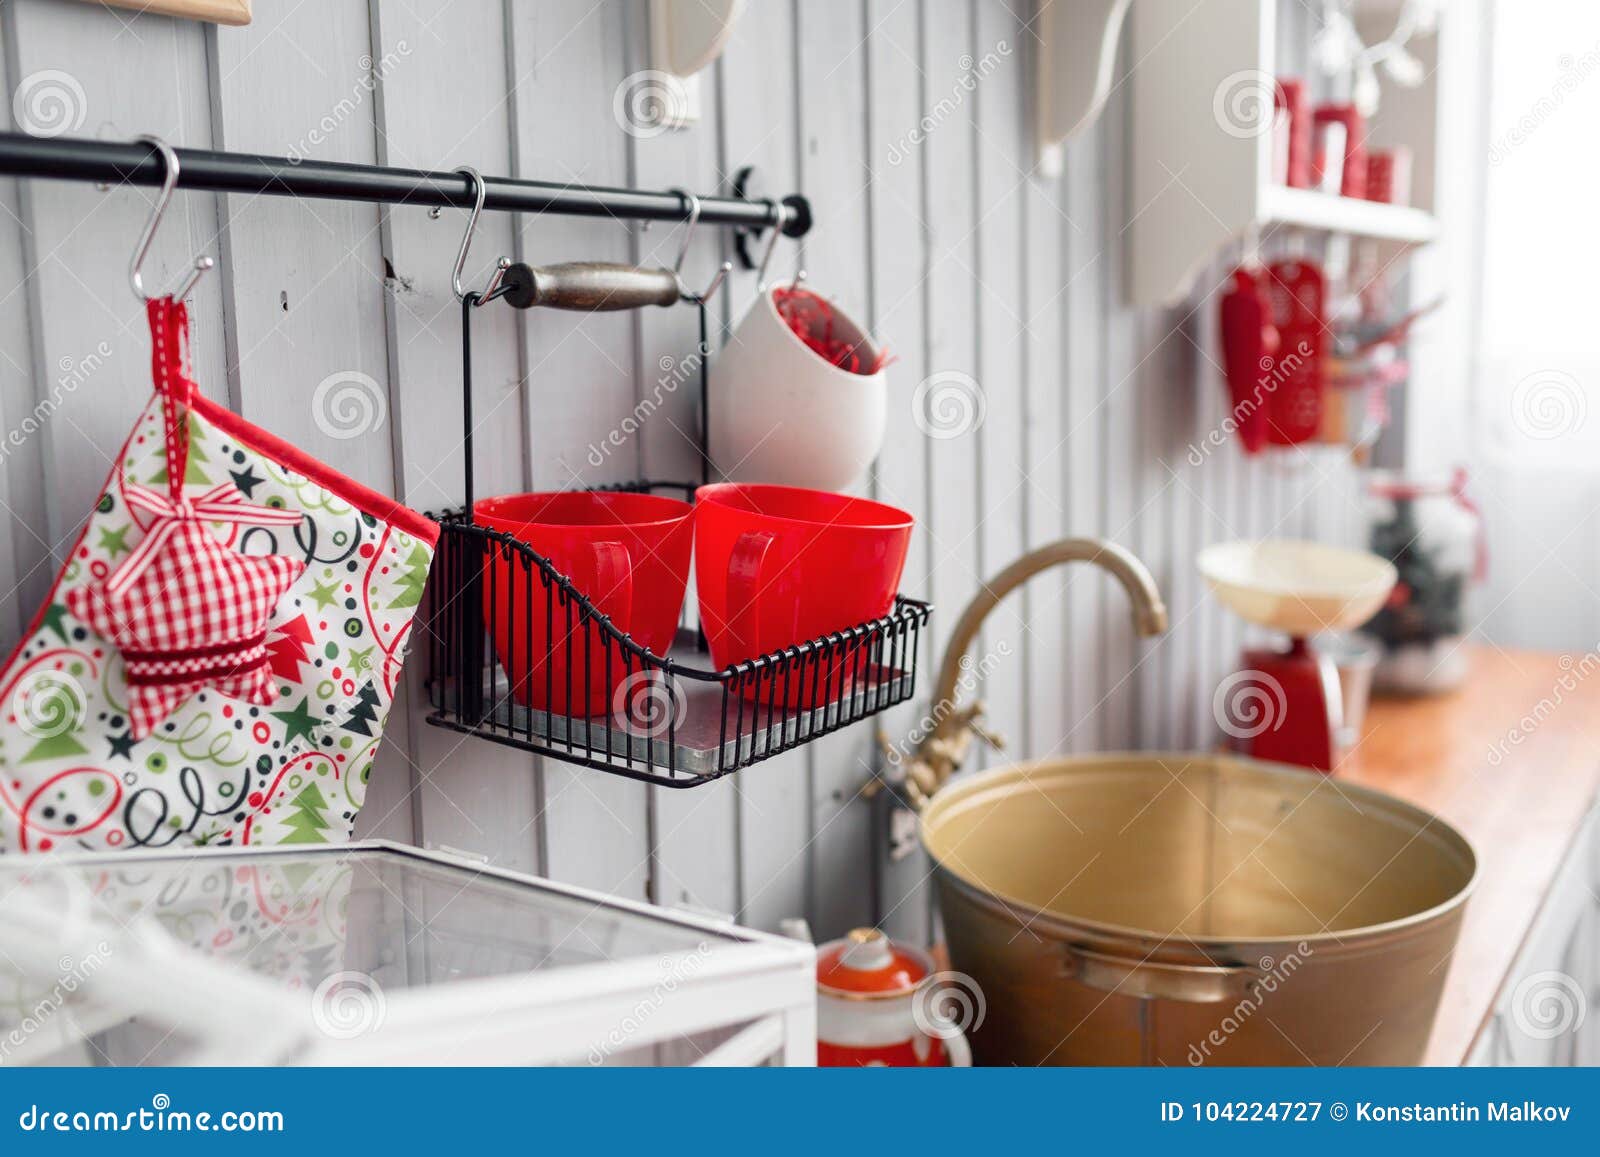 Shelves With Dishes Interior Light Grey Kitchen And Red Christmas